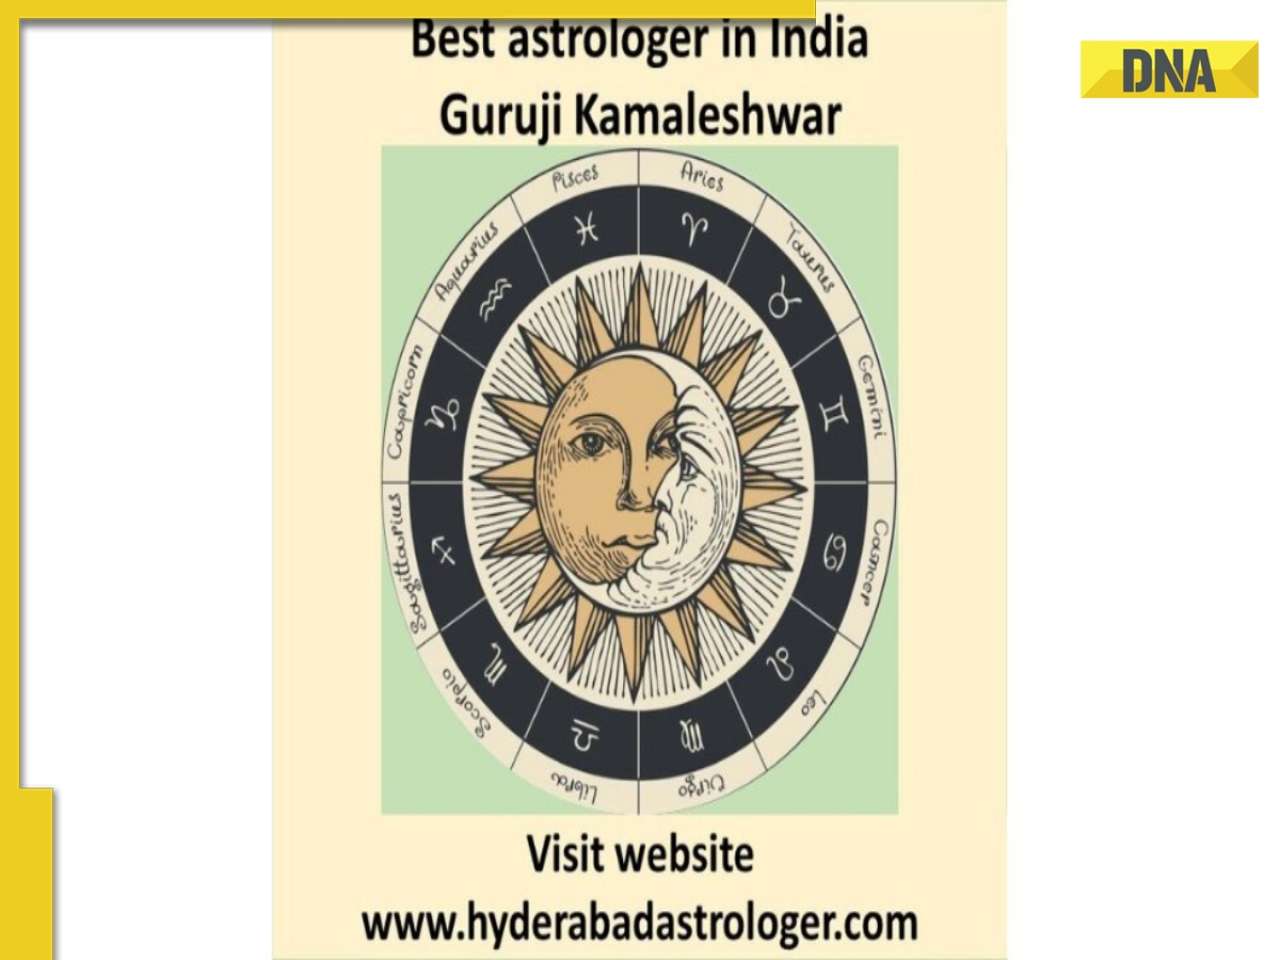 Looking for best astrologer in Bangalore…